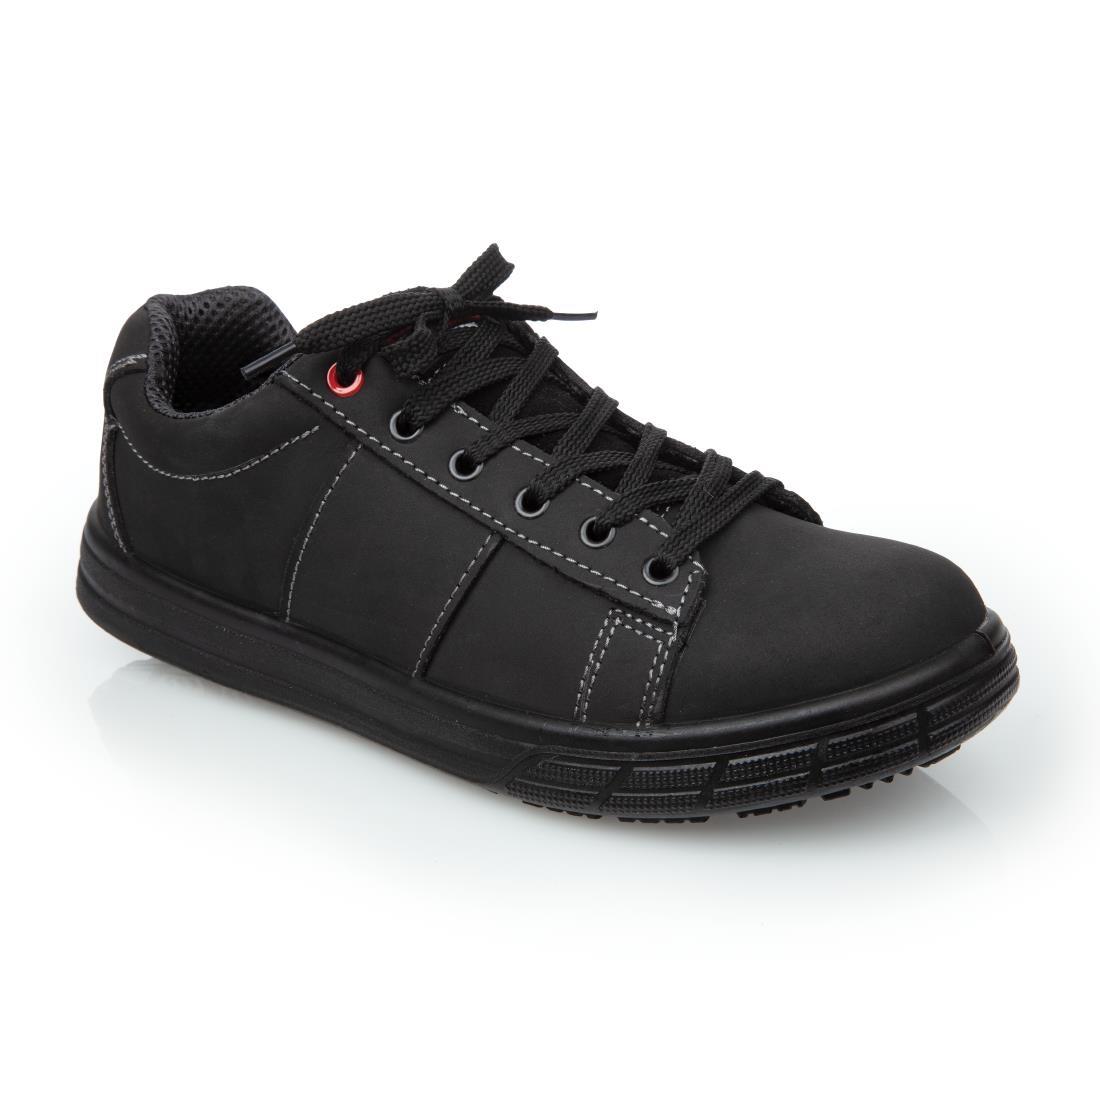 Slipbuster Safety Trainers Black 43 - BB420-43  - 1